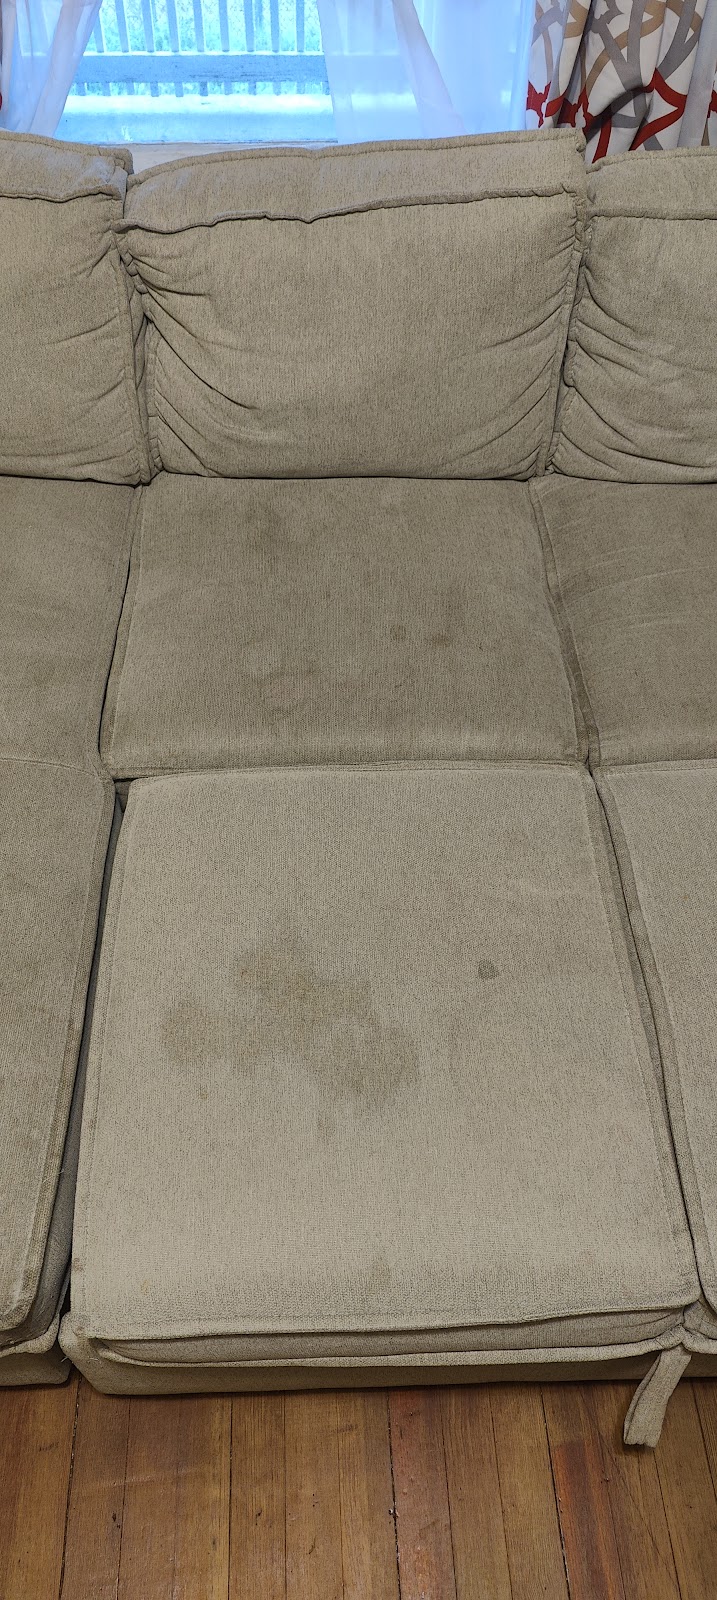 Standard Service Upholstery Cleaning | 275 Exeter St, Bridgeport, CT 06606 | Phone: (203) 708-5320